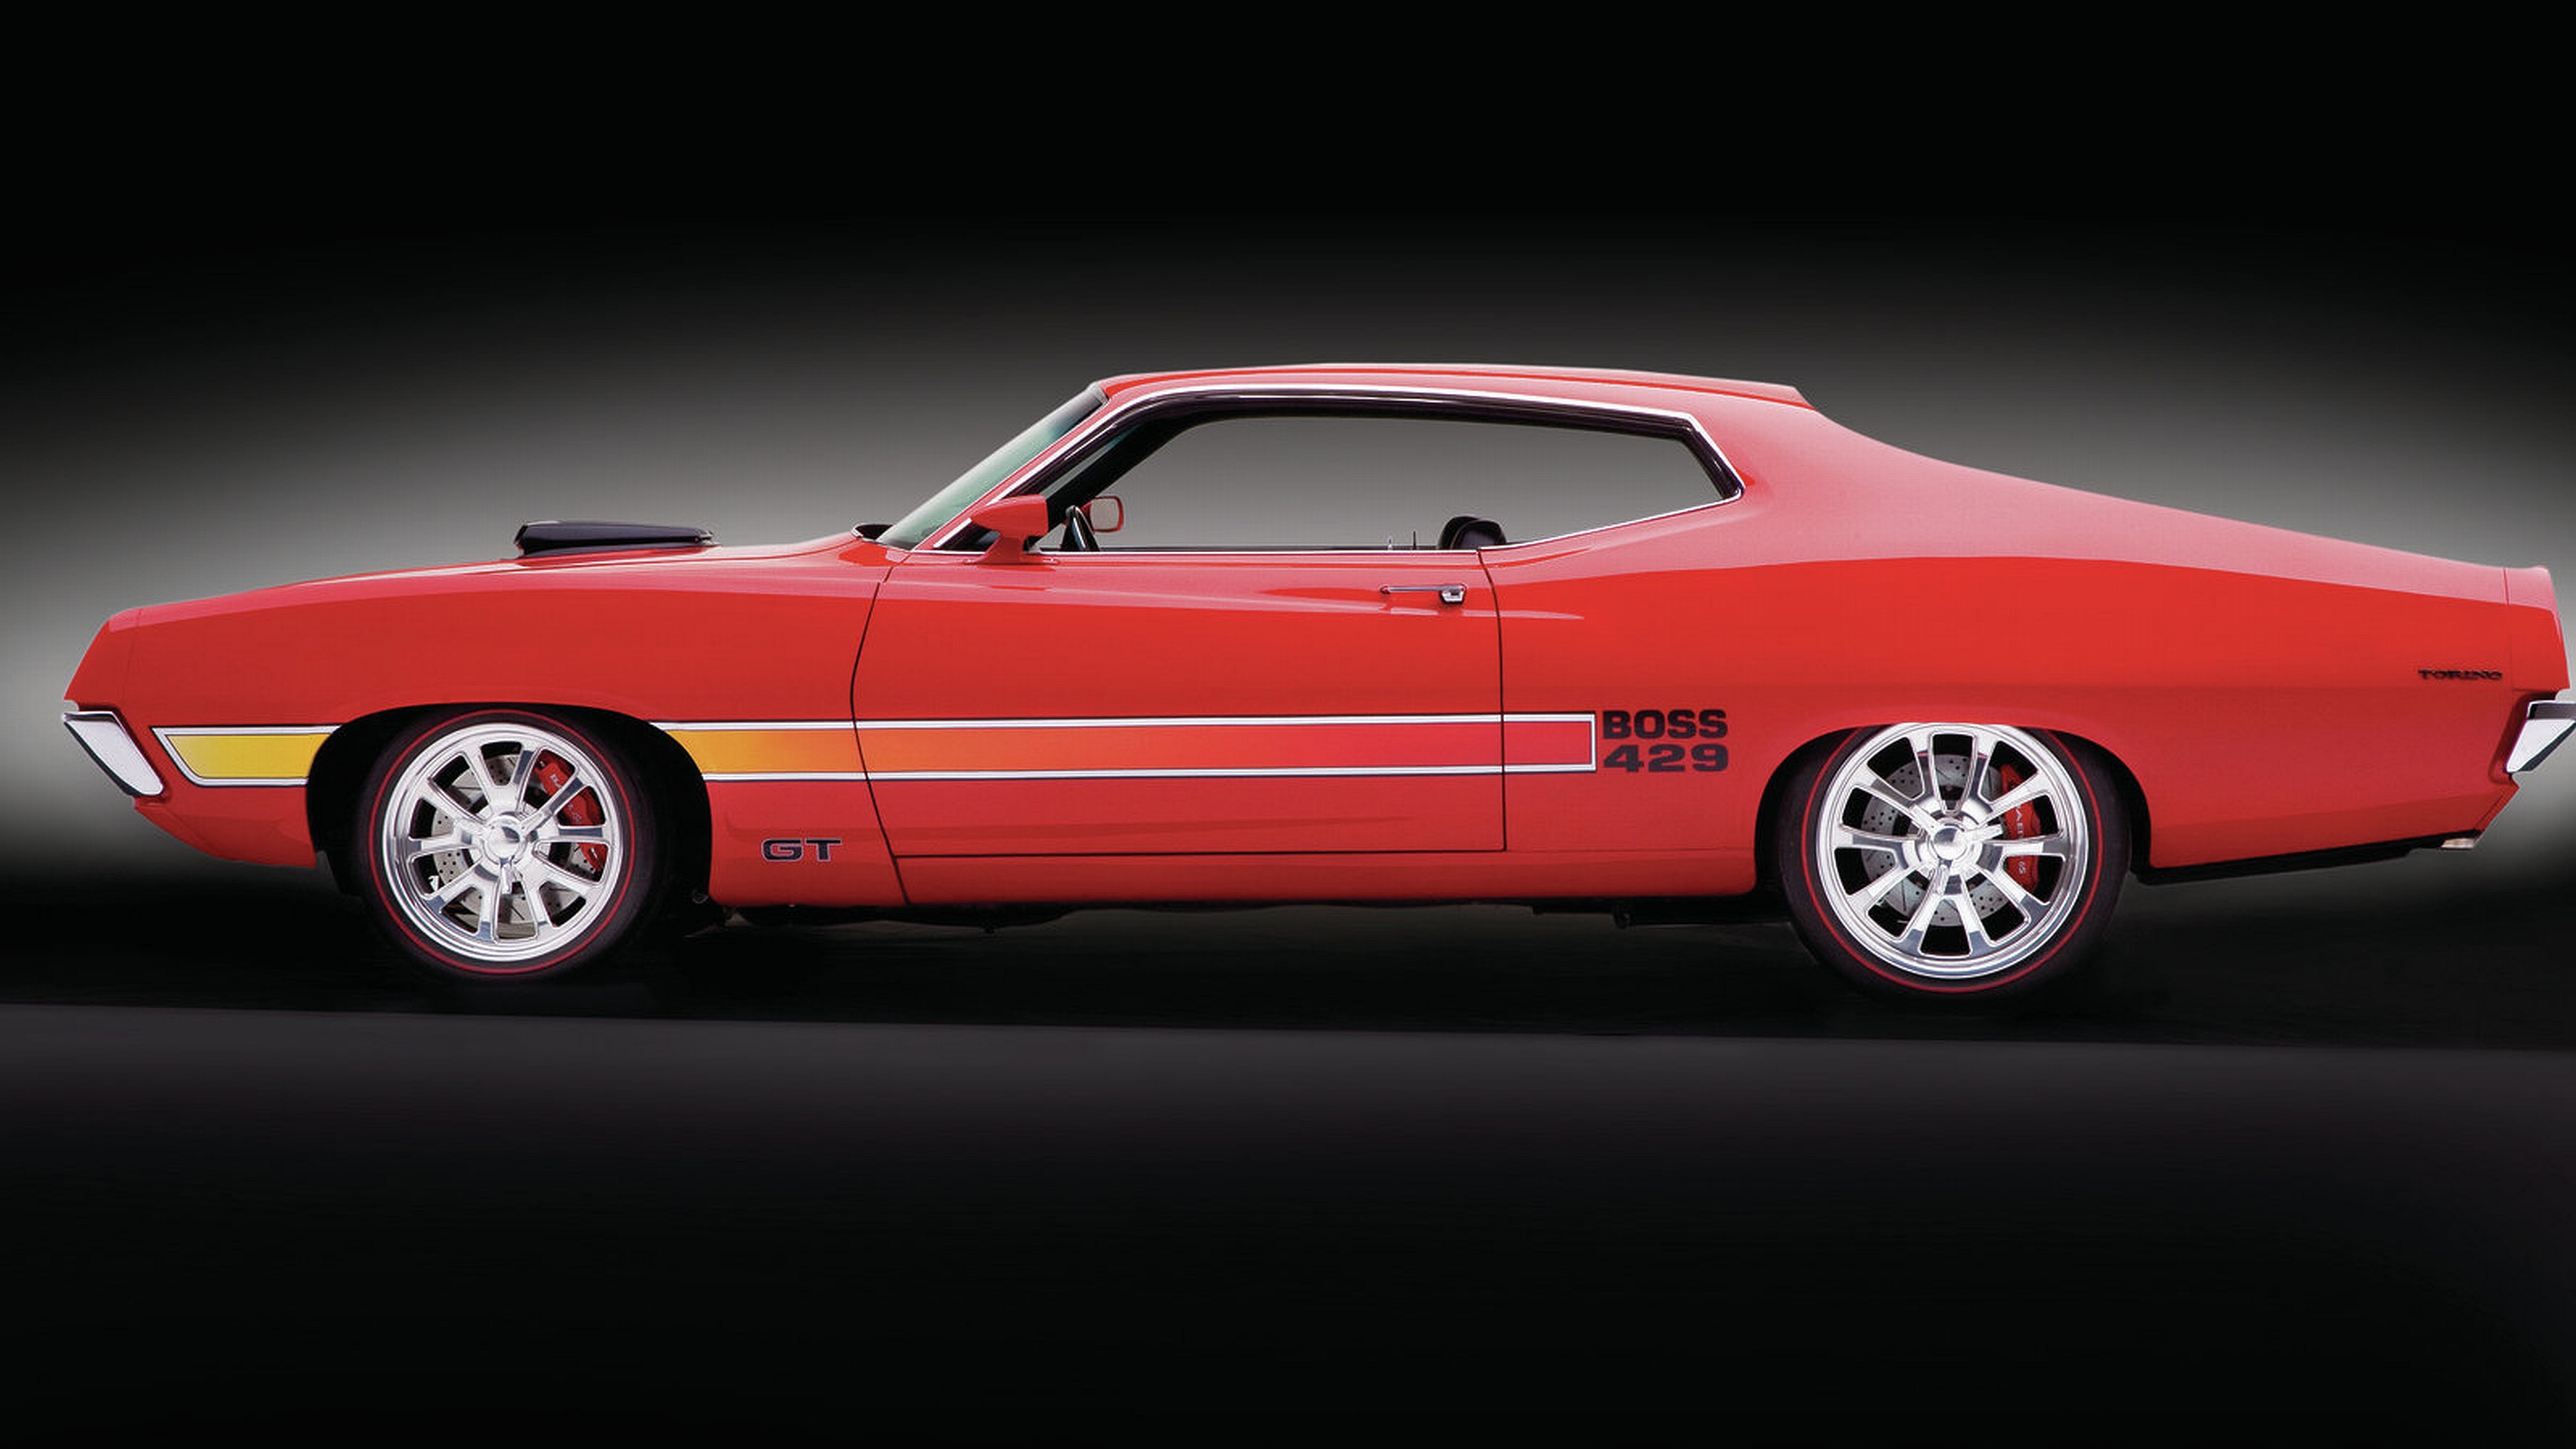 1970 Ford Torino GT, a classic muscle car with sleek design and powerful performance.